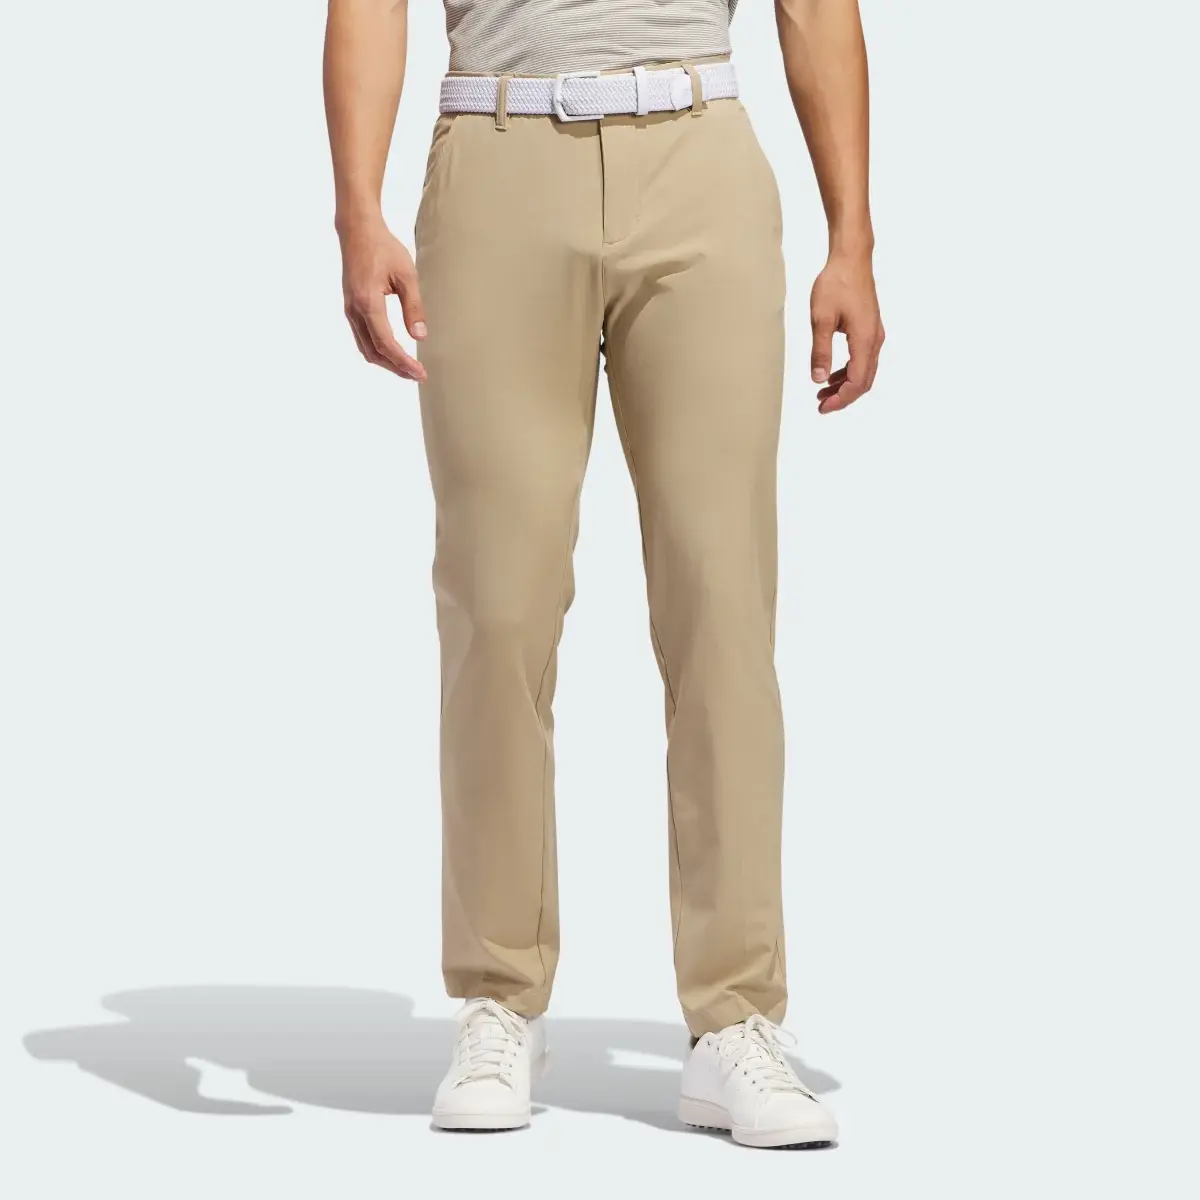 Adidas Ultimate365 Tapered Golf Pants. 1